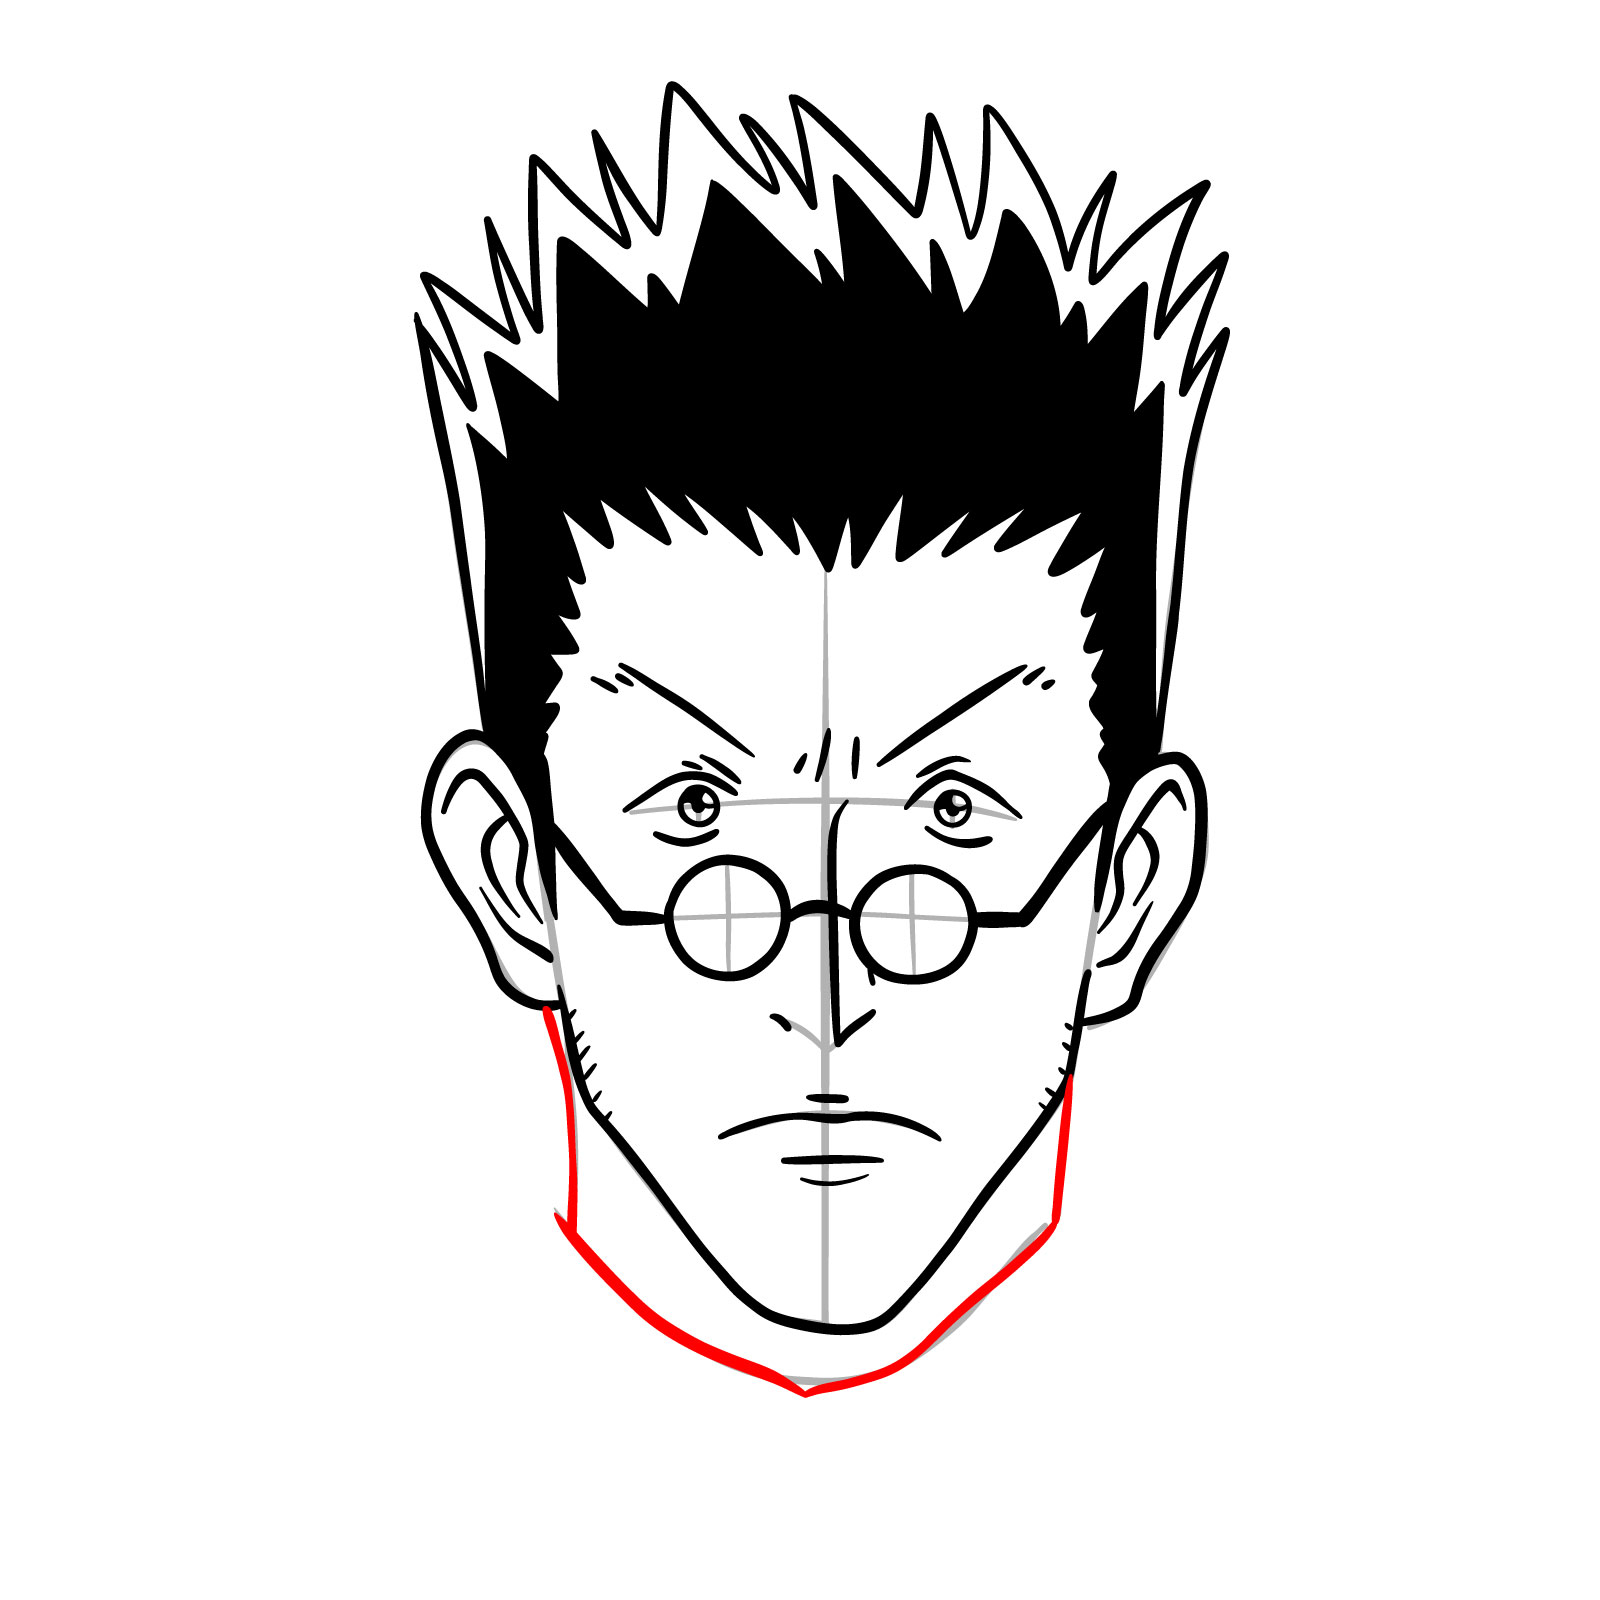 How to draw Leorio's face - Hunter x Hunter - step 16